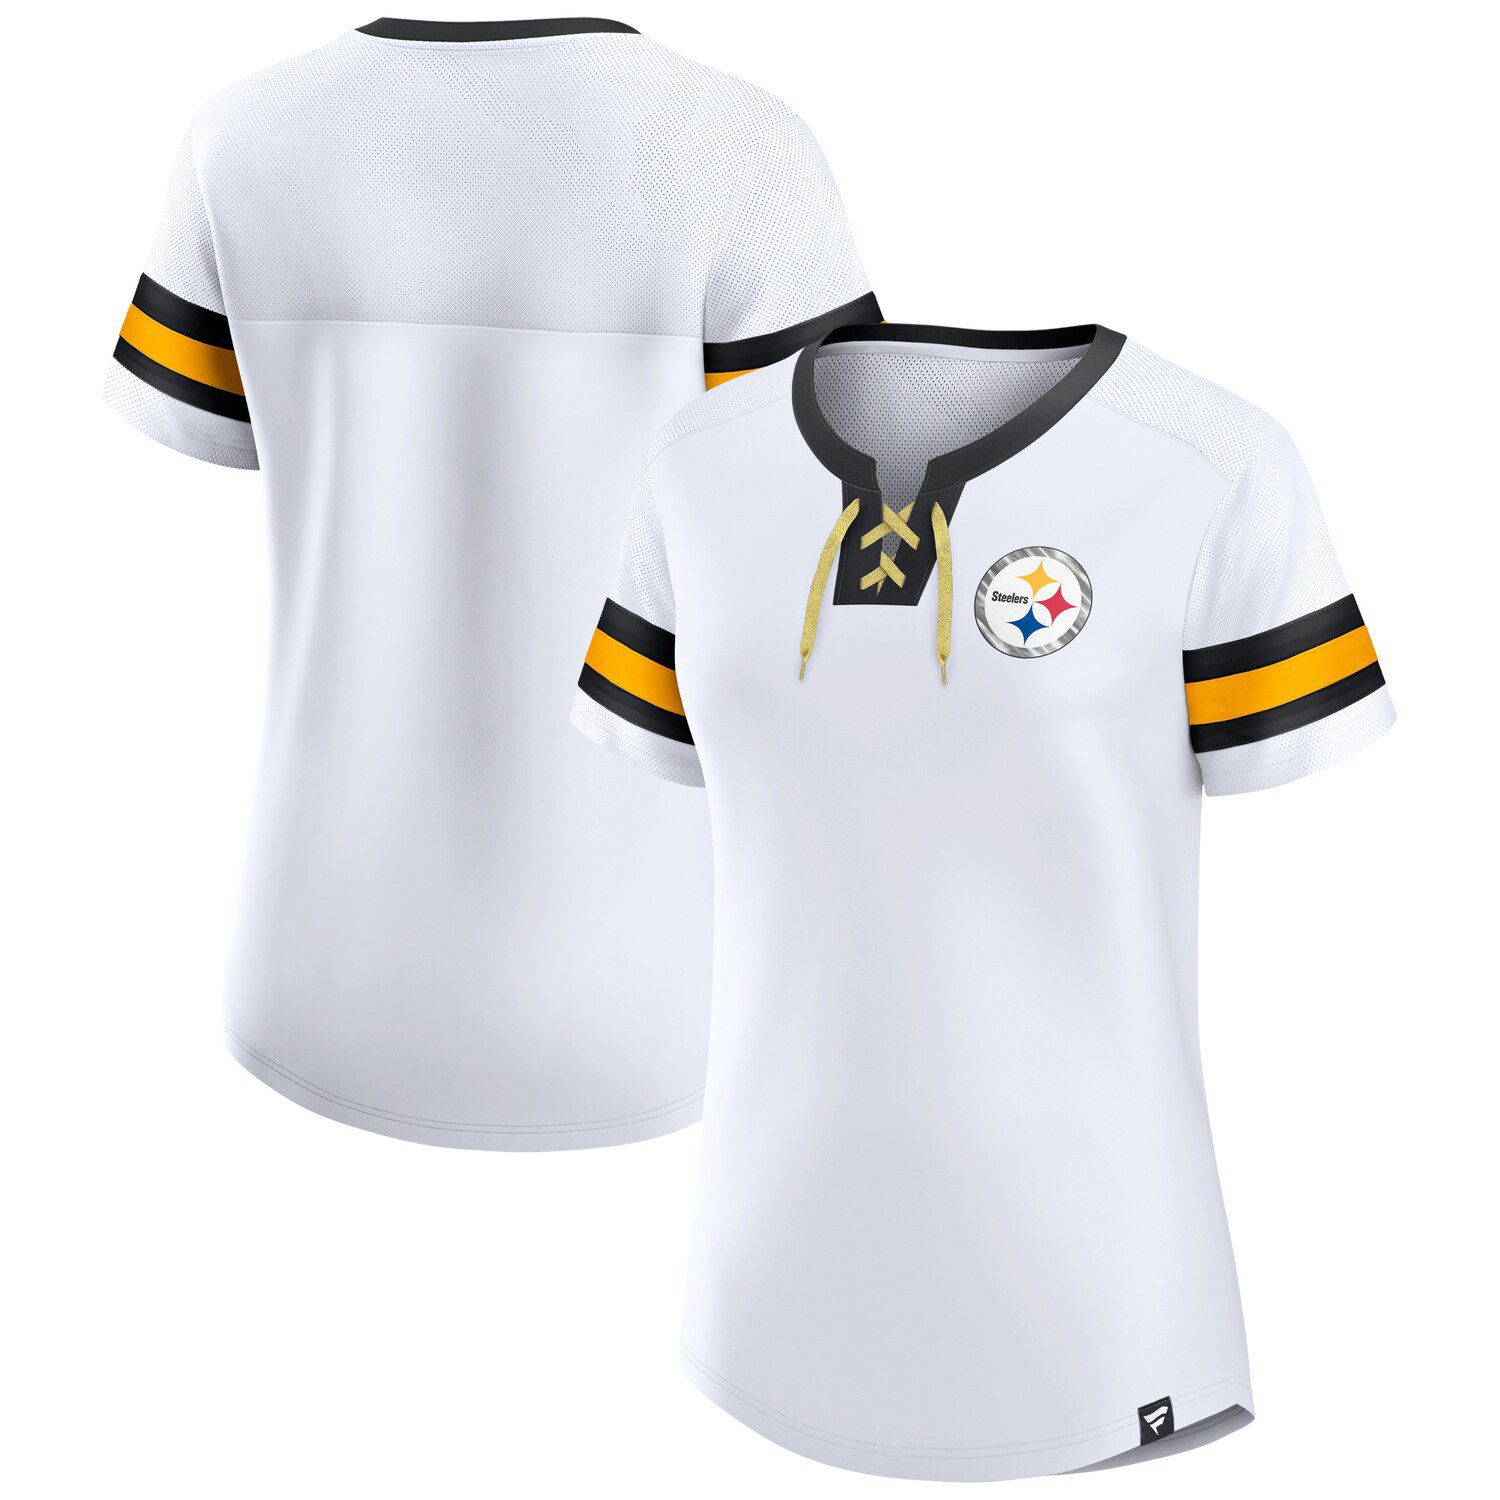 FOCO Pittsburgh Steelers NFL Mens Short Sleeve Soccer Style Jersey